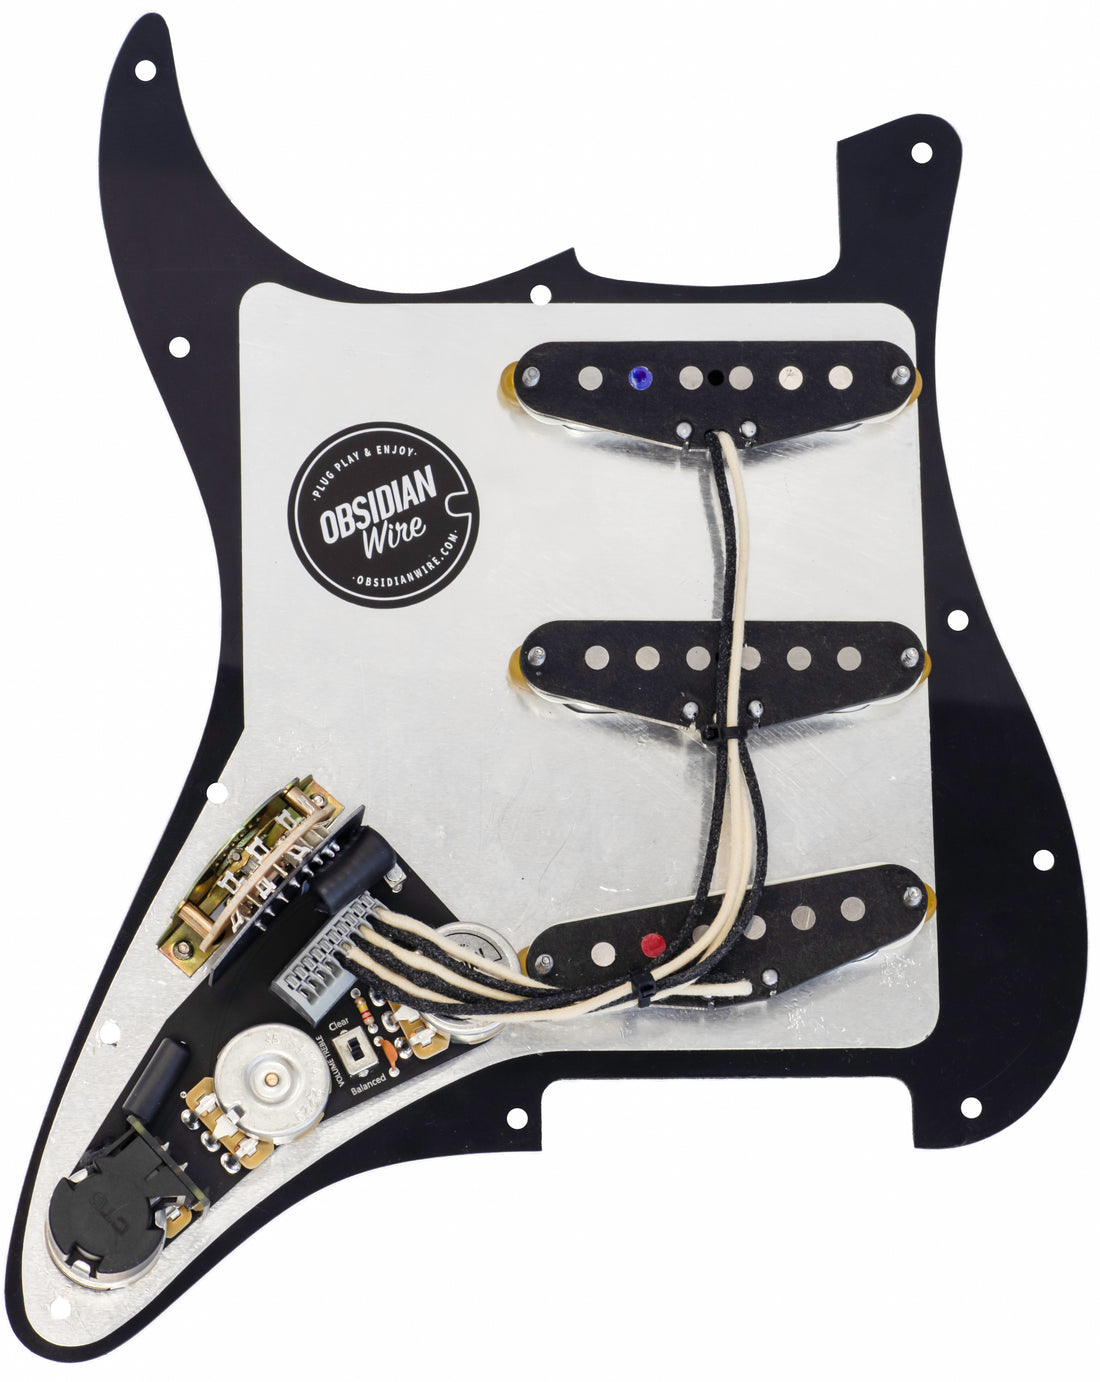 70's Classic Black/White Pre-Wired Pickguard Assembly-J11